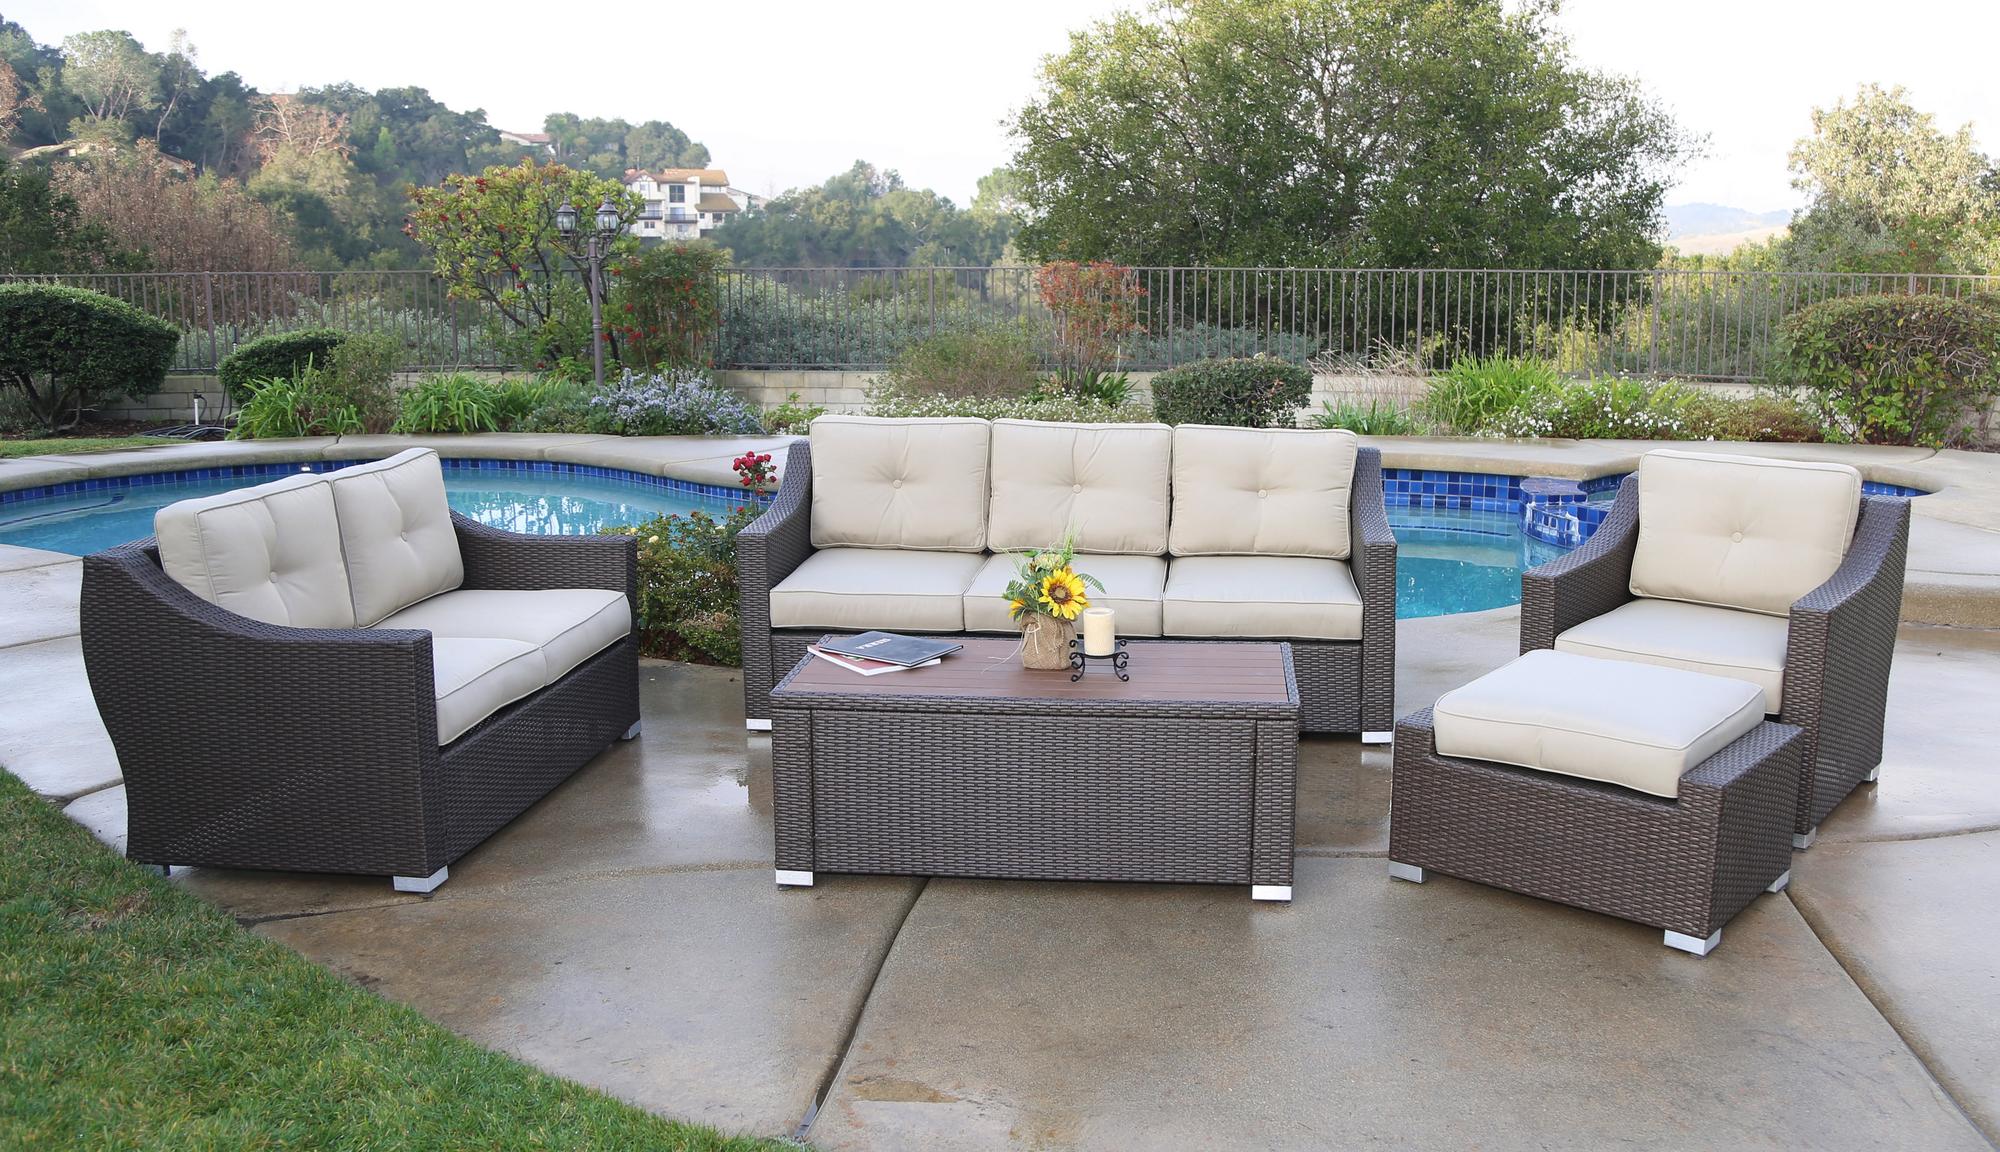 Sb-3775ds-1 5 Piece South Beach Wicker Patio Luxury Deep Seating Group With Cushion